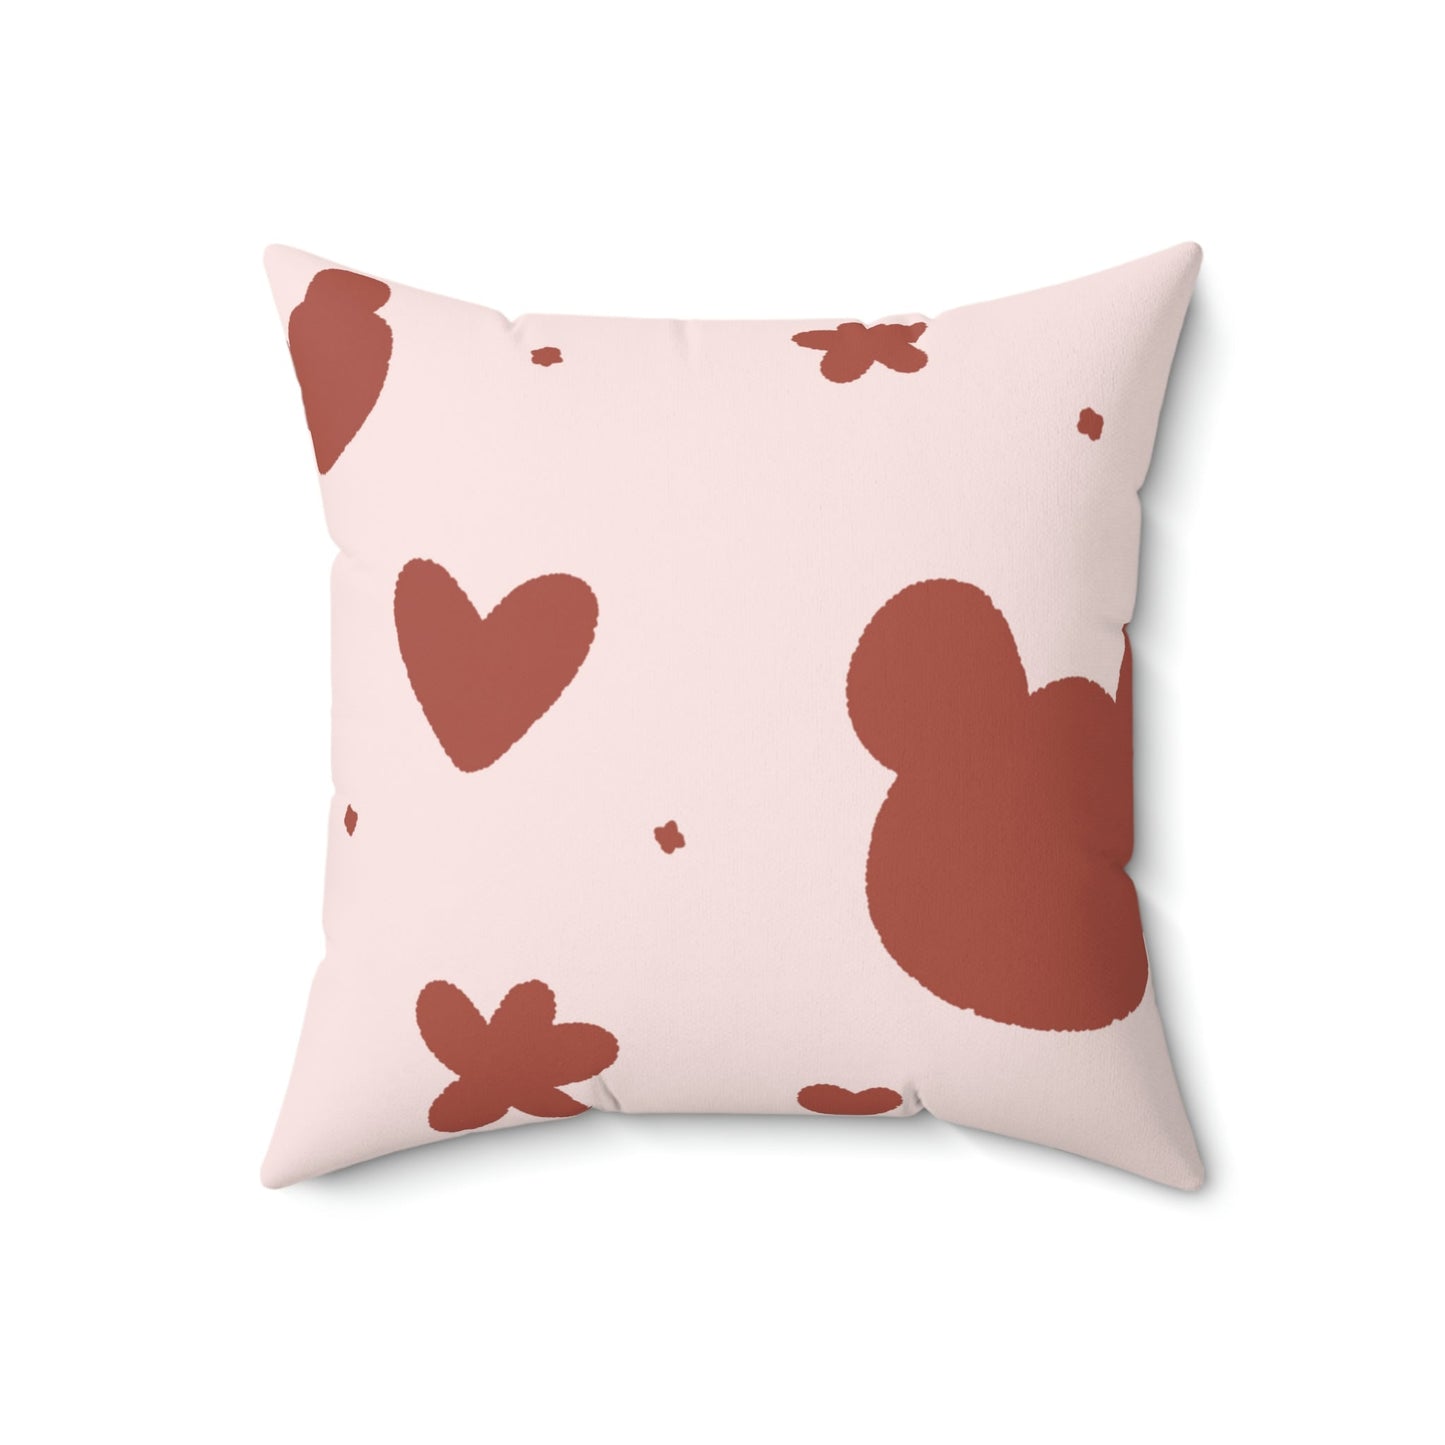 Cuddle Bear Square Pillow Home Decor Pink Sweetheart